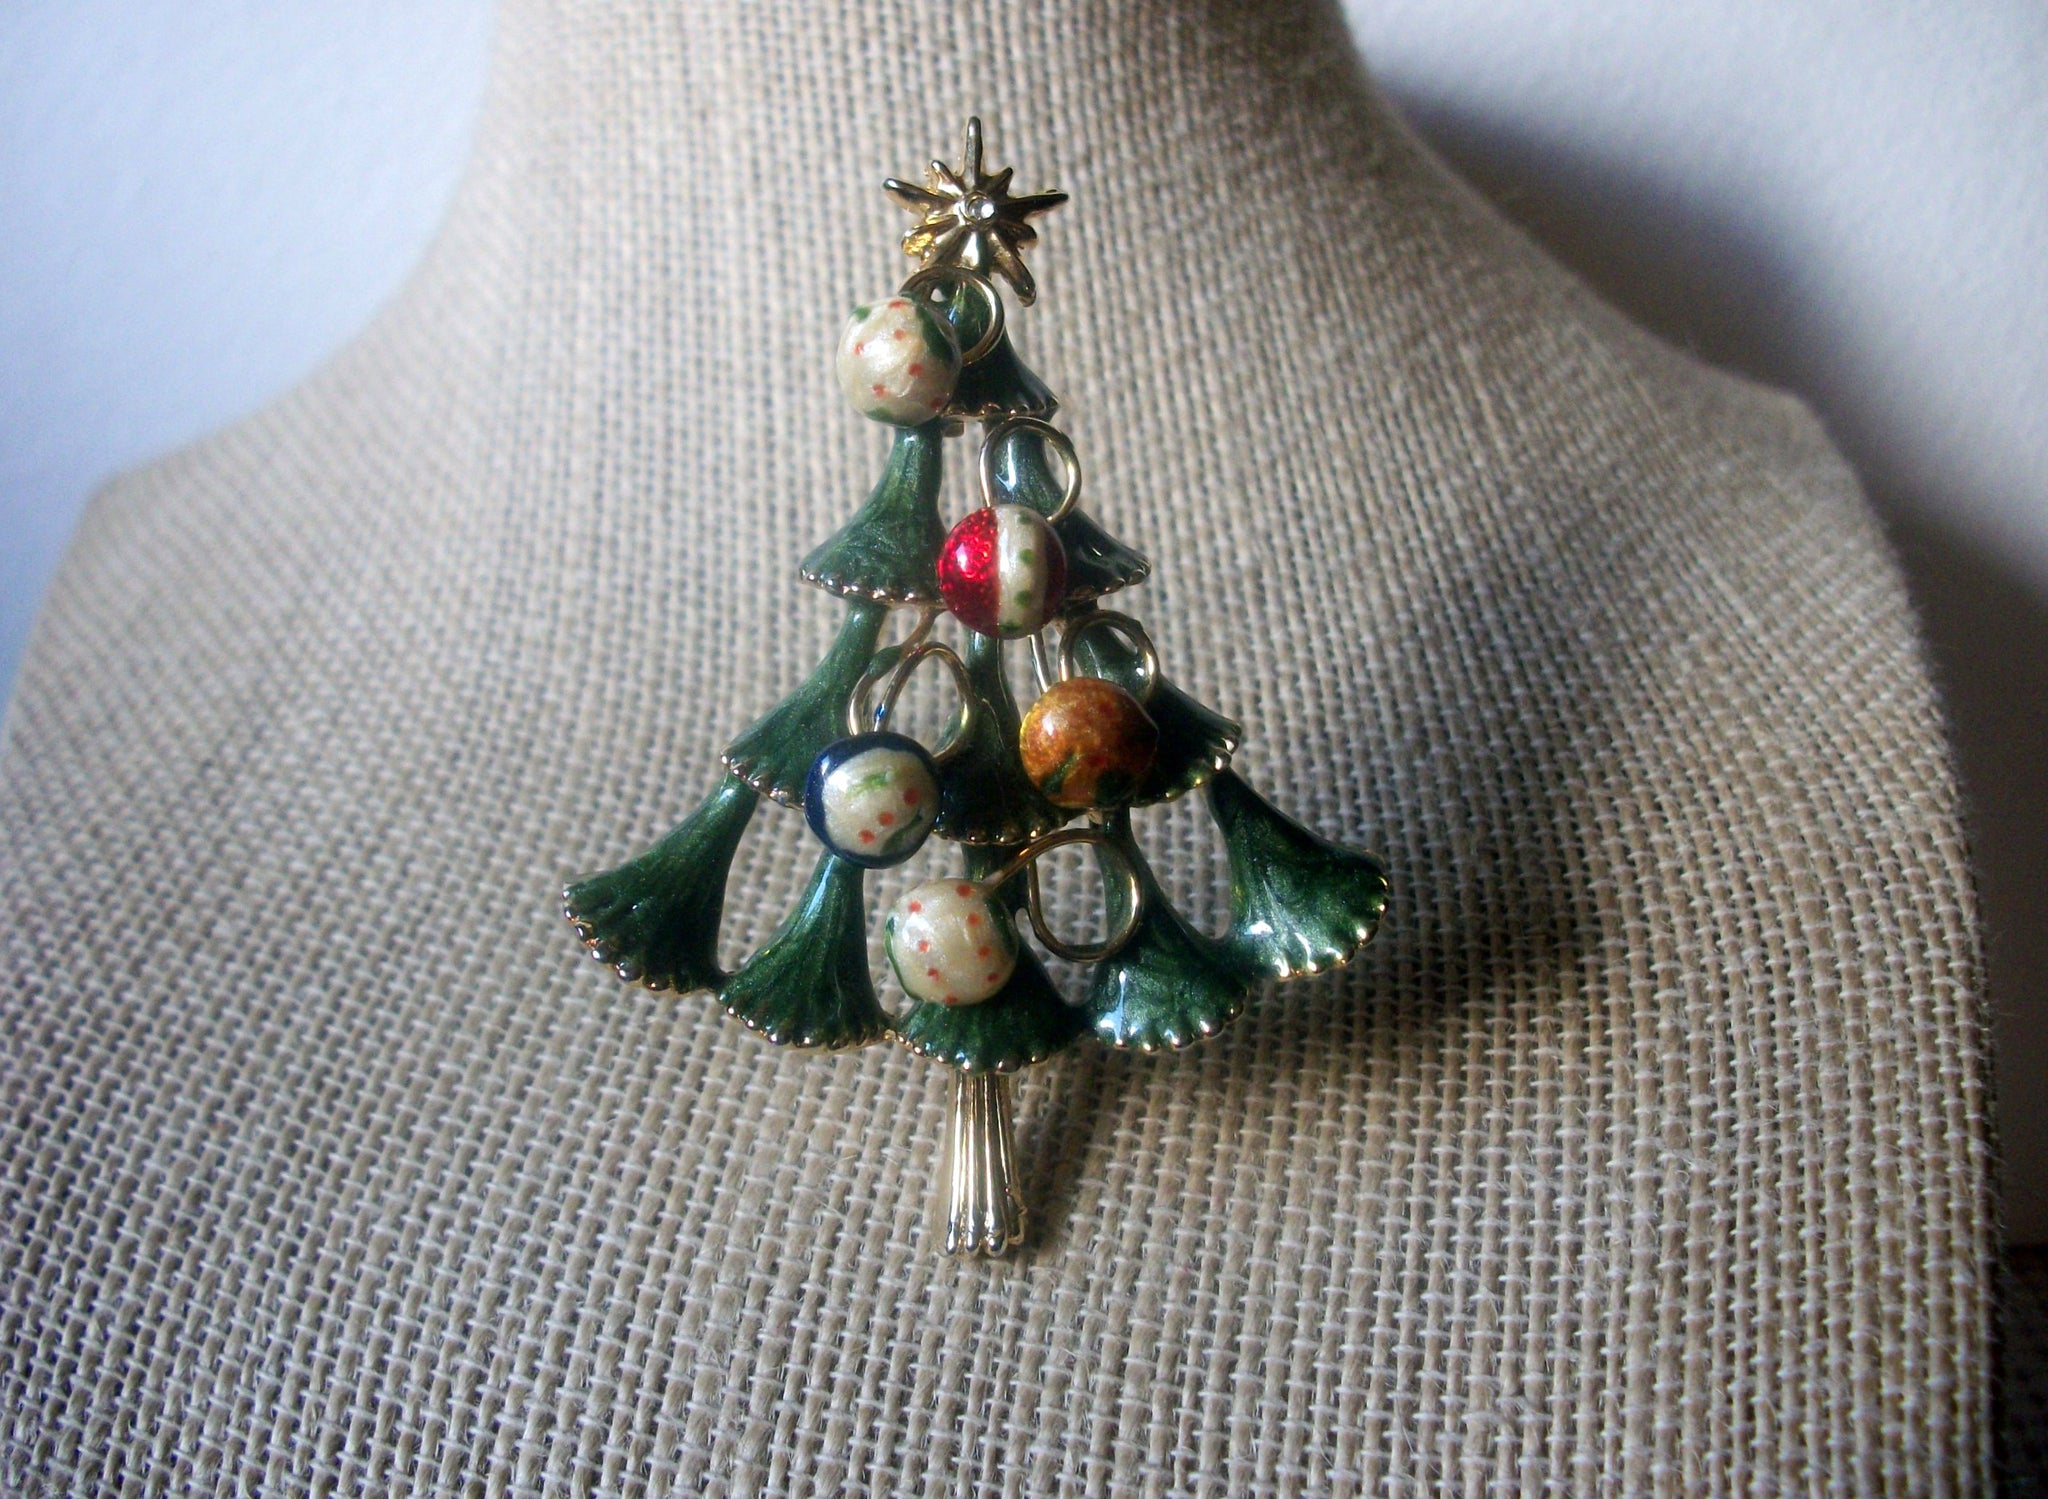 Vintage Jewelry Hand Painted Ornaments, Green Enameled Gold Tone, Brooch Pin 53018